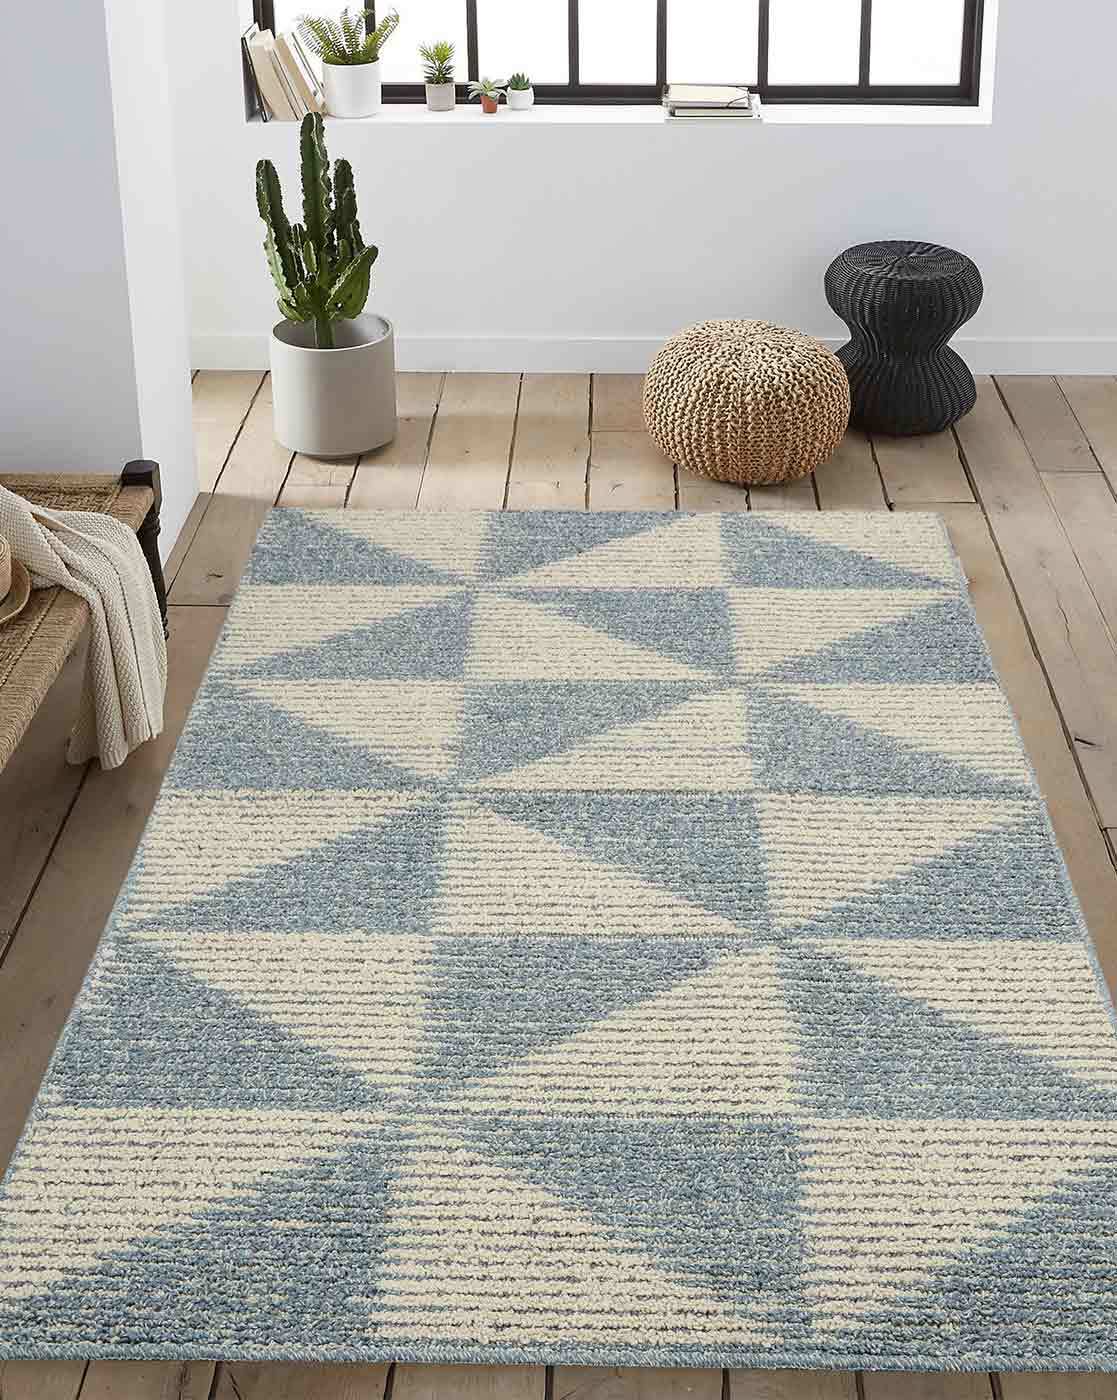 Turquoise Rugs Carpets Dhurries, Turquoise Kitchen Rugs